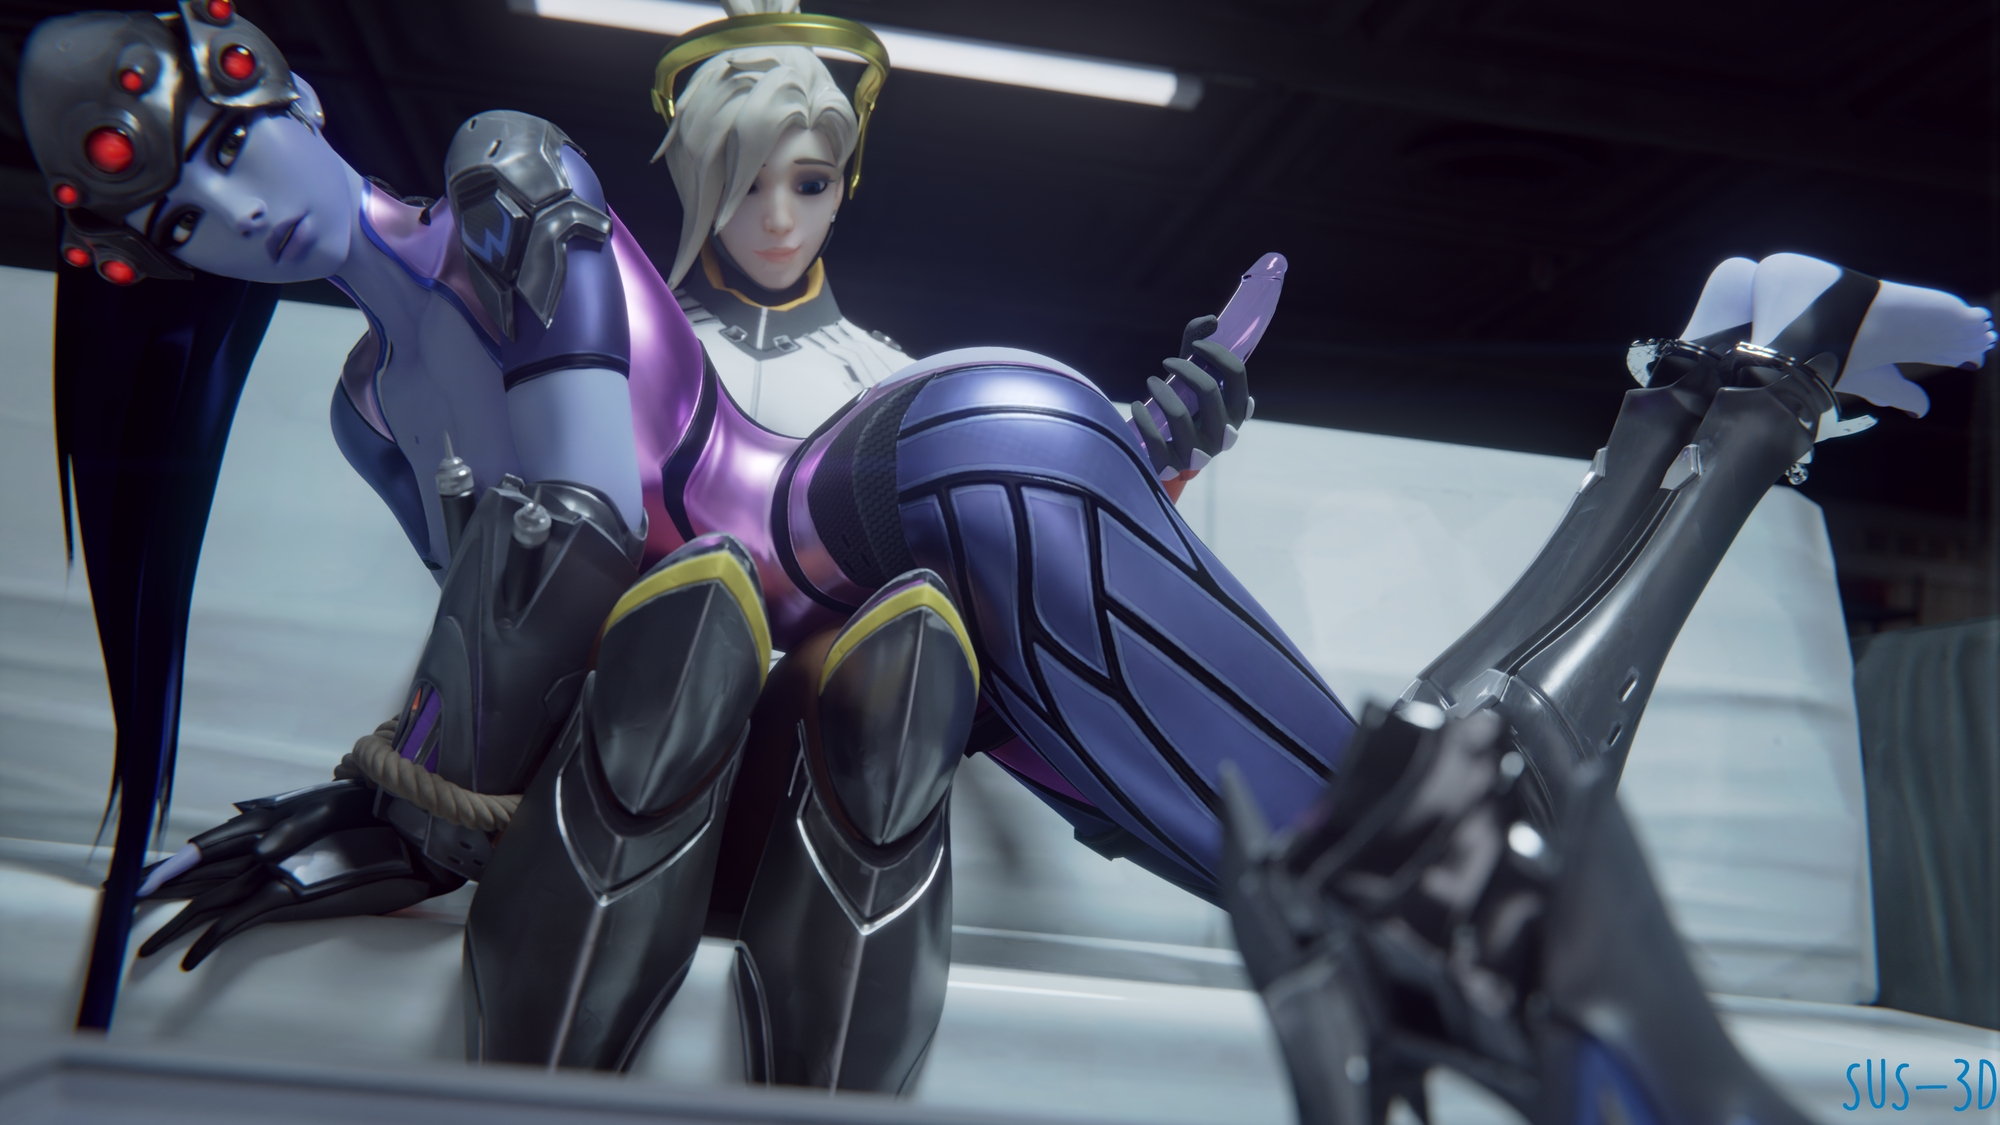 Widowmaker Chained and fucked by Mercy Dildo Overwatch 3D Porn Mercy Widowmaker Overwatch Dildo Sex Toy Lesbian Anal Chained Bondage Sex Rule34 3d Porn Feet